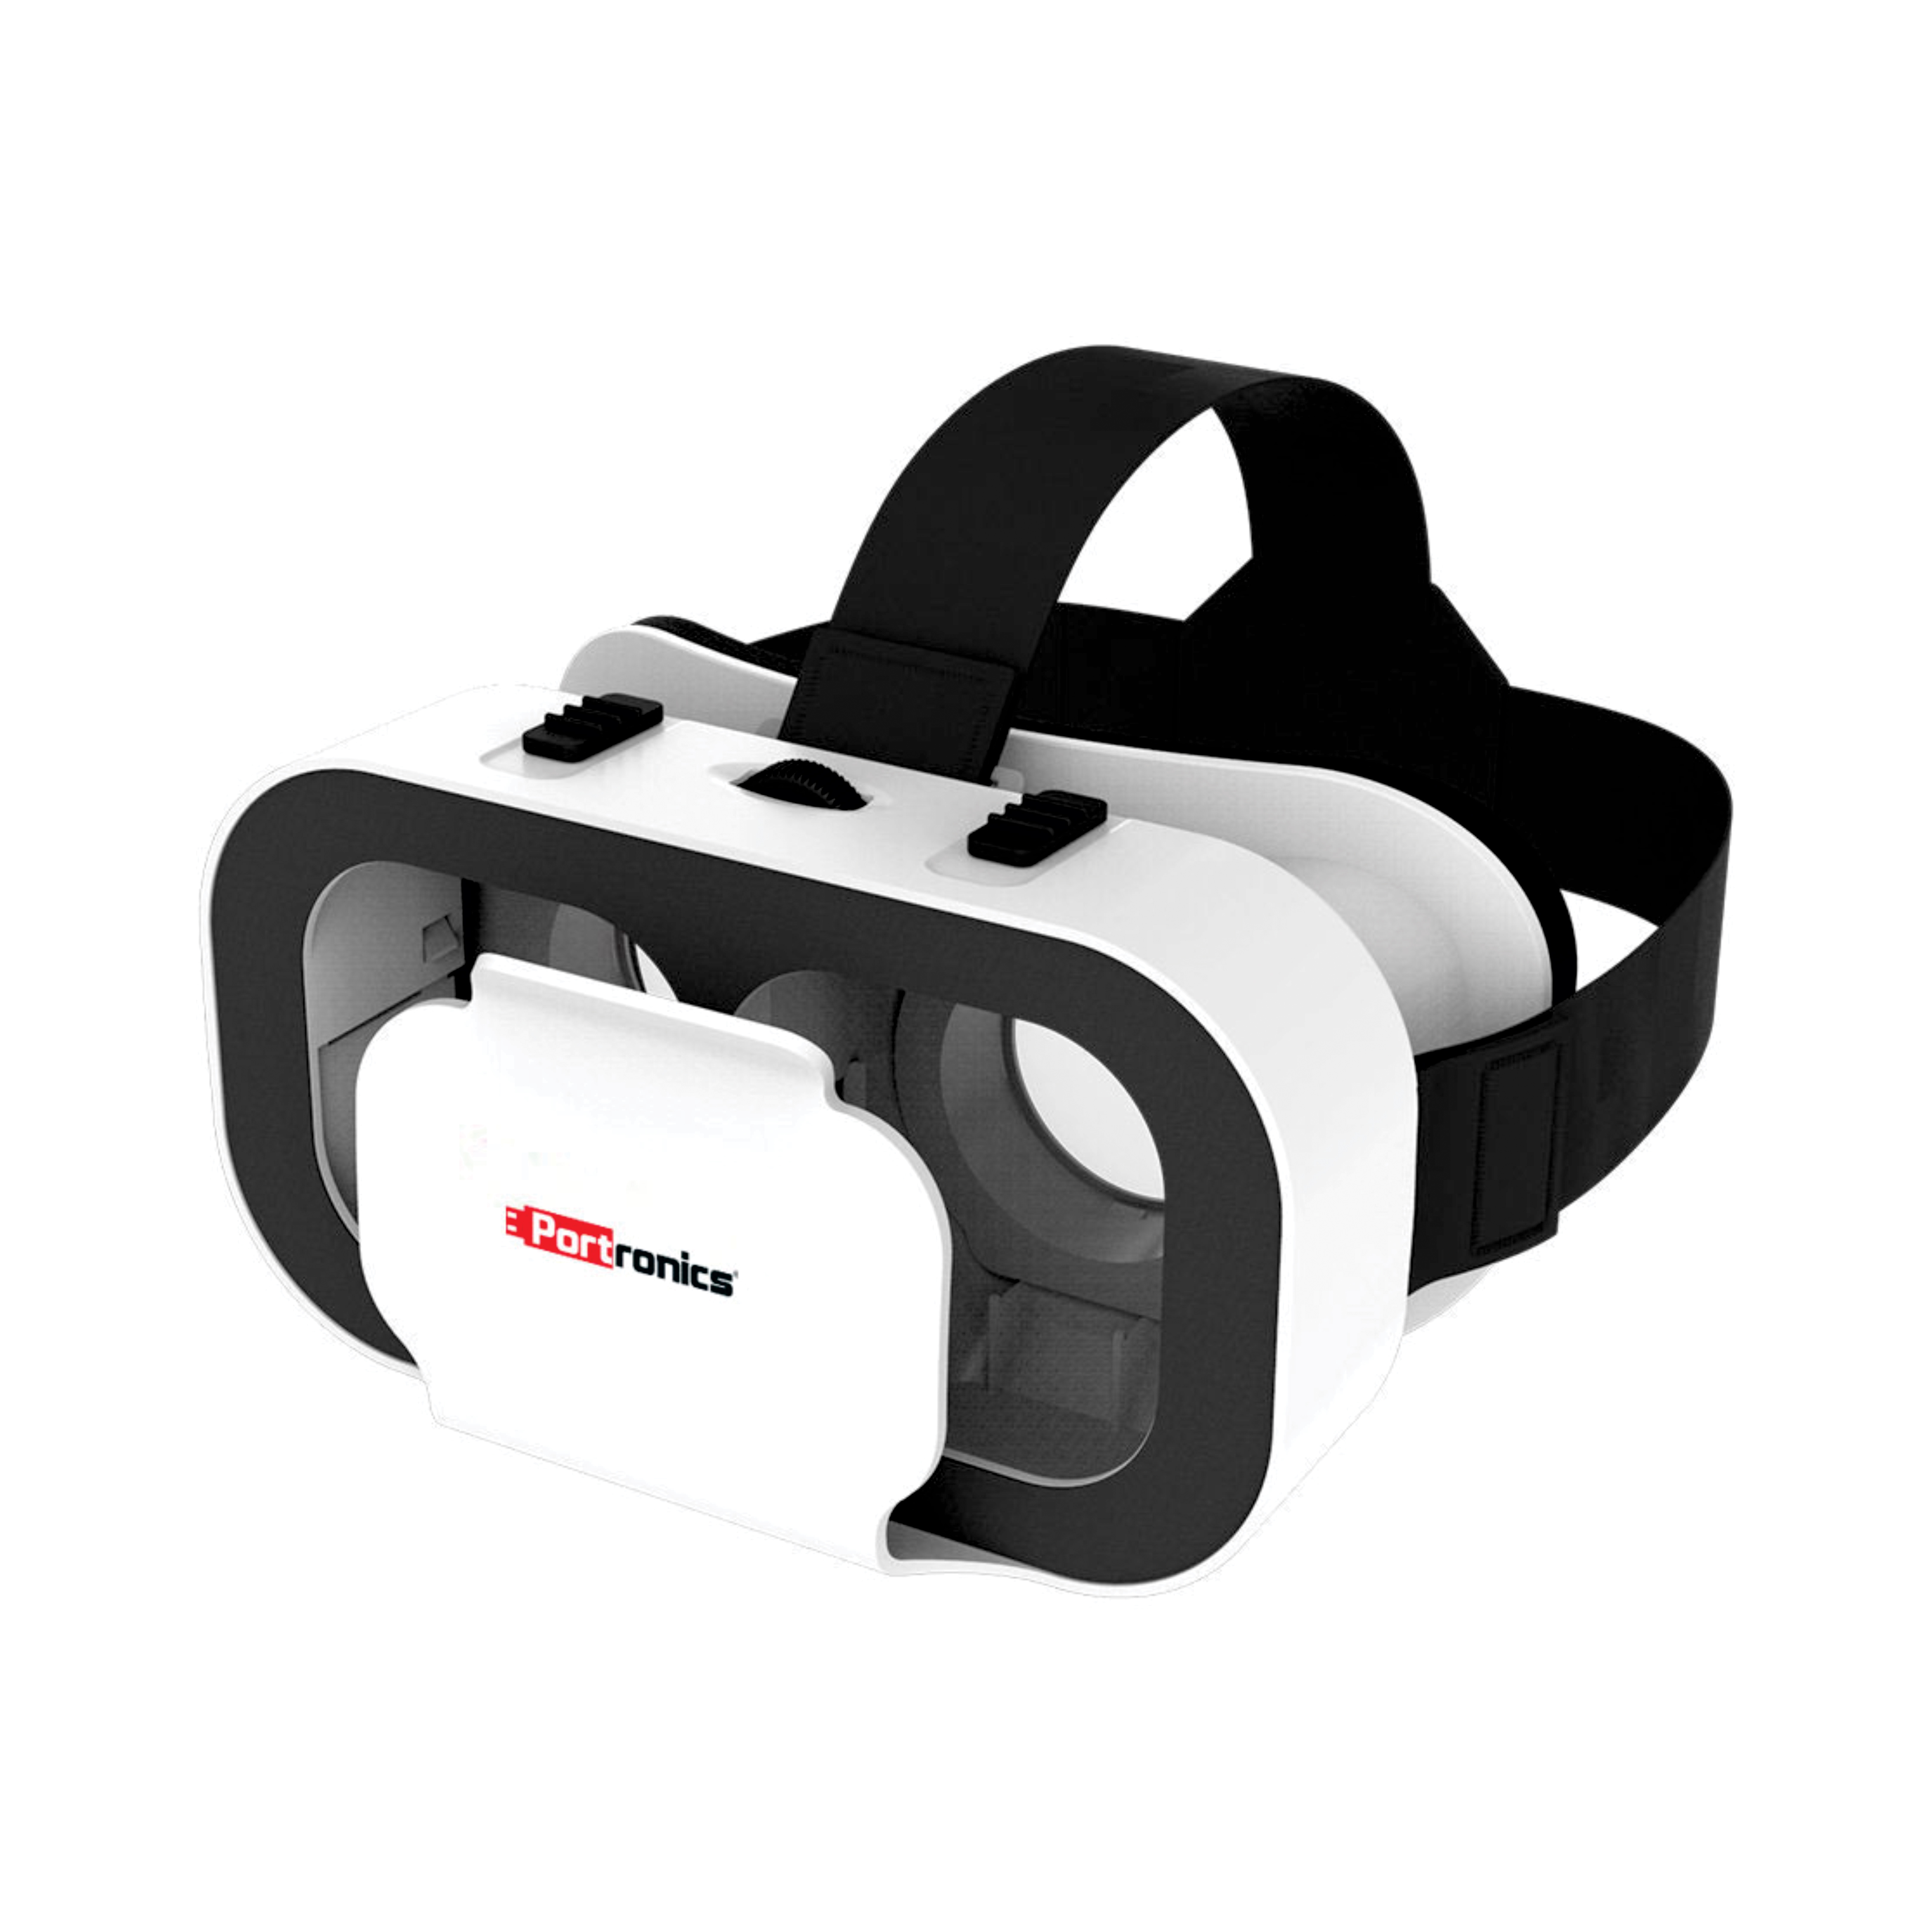 You are currently viewing Portronics Launches the Virtual Reality Headset series, SAGA and SAGA Mini